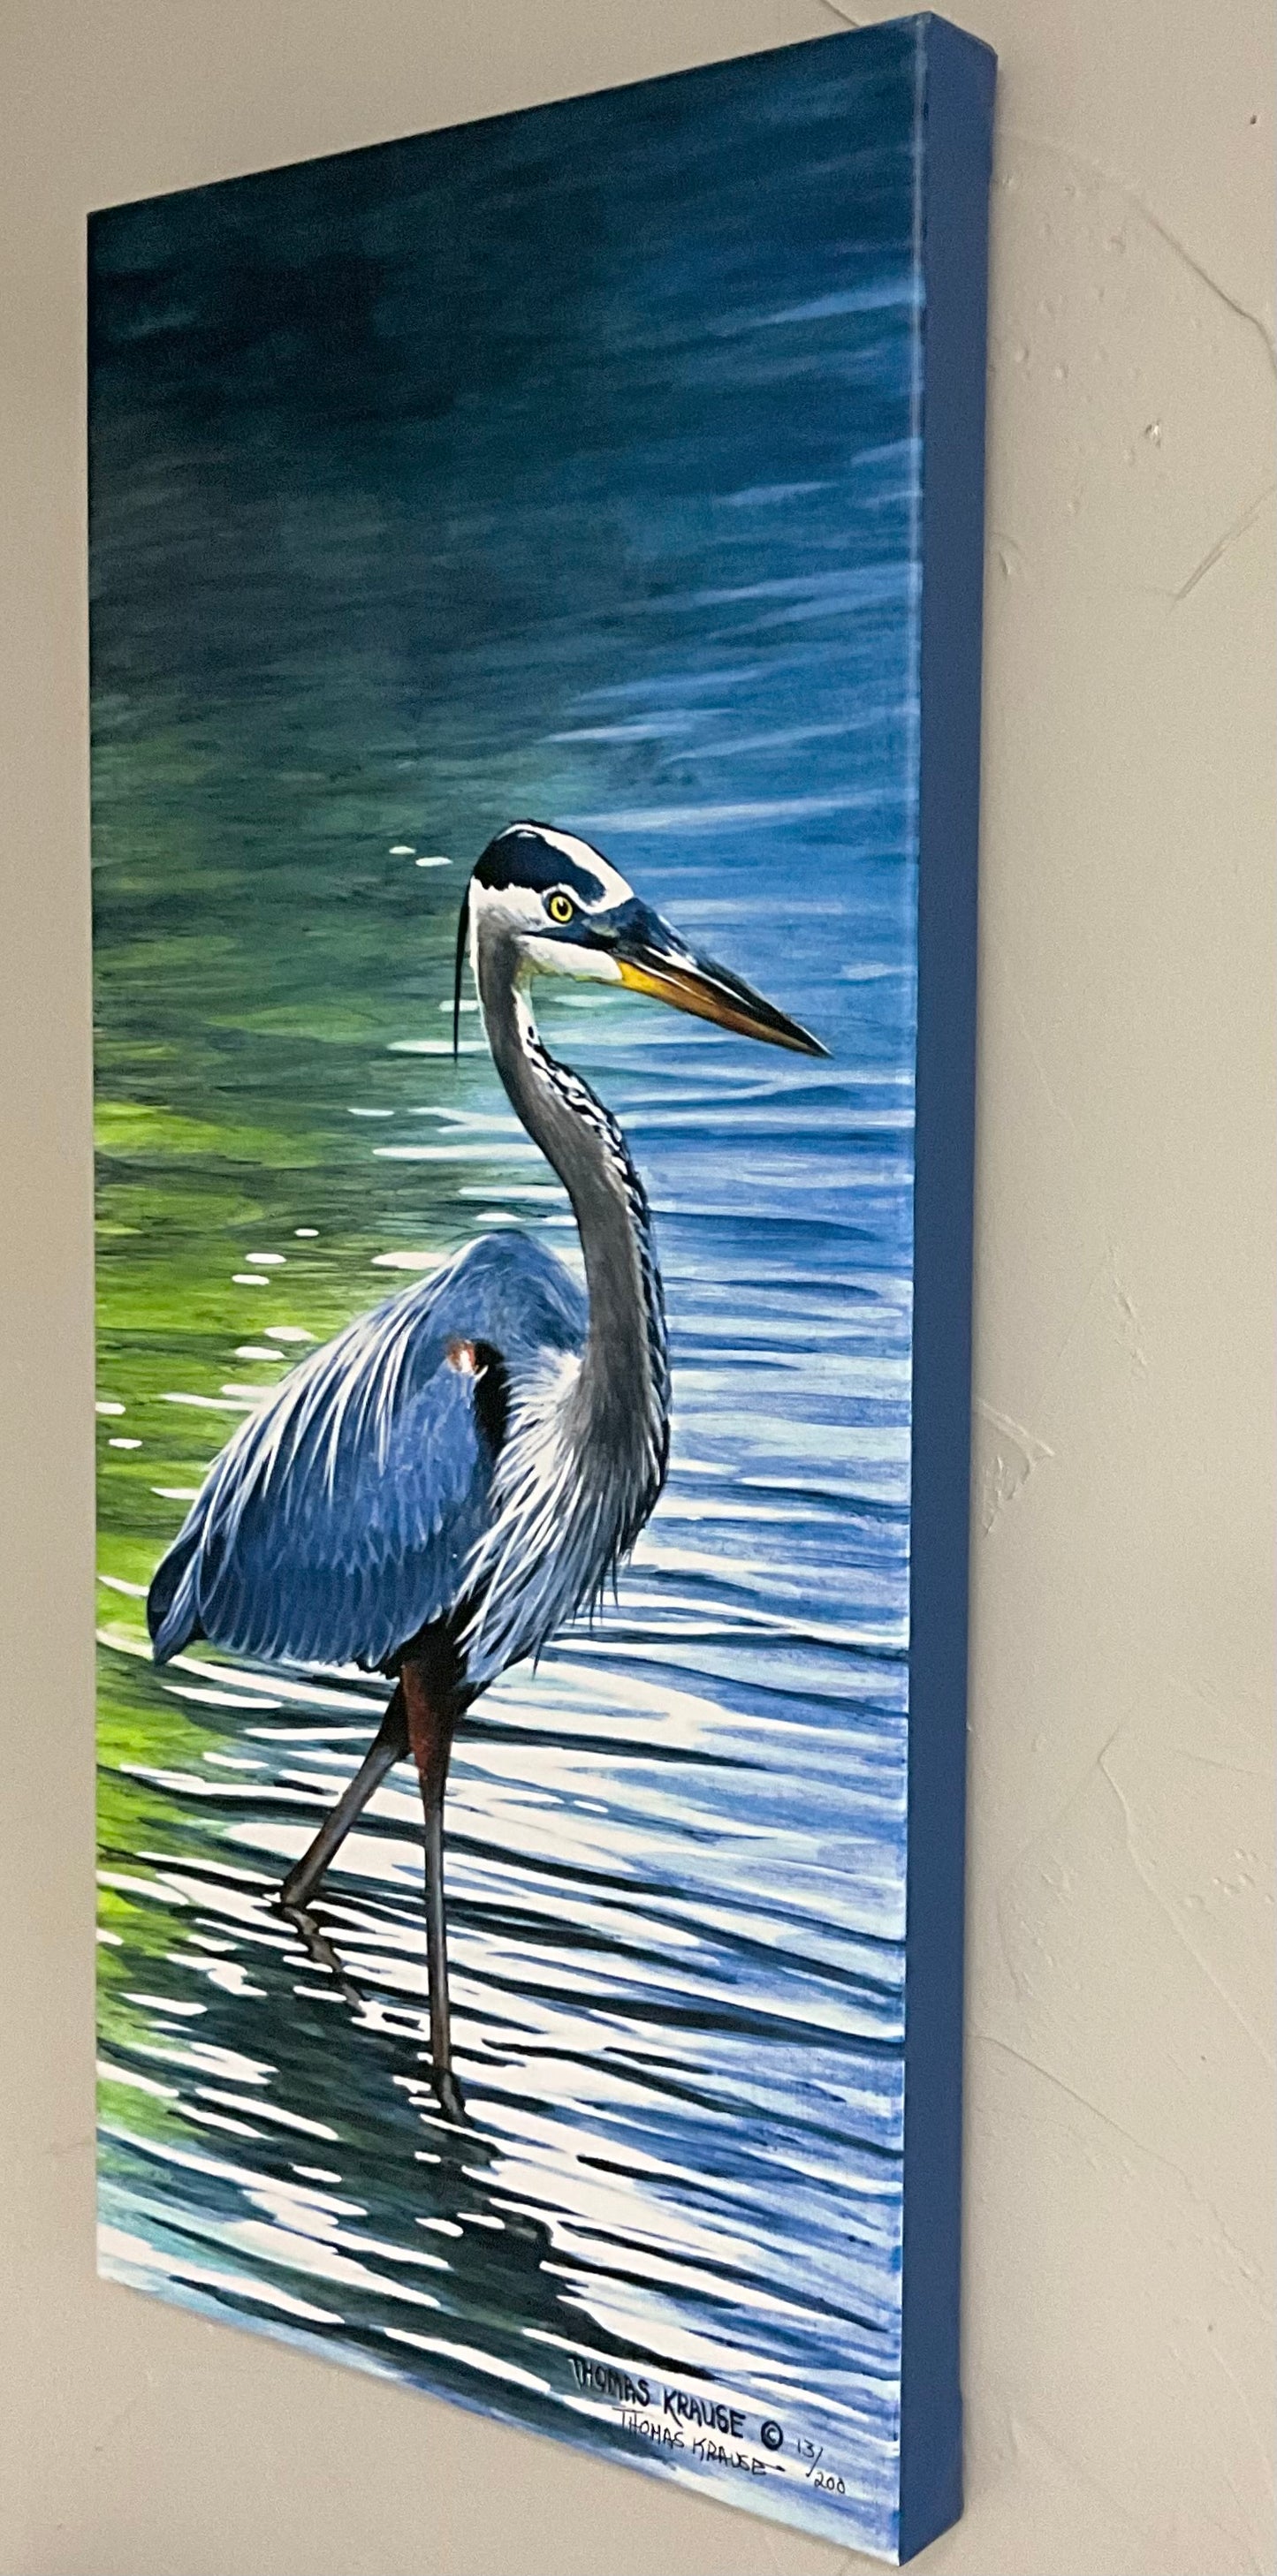 Blue Heron - Framed Gallery Wrap Canvas, Signed and Numbered